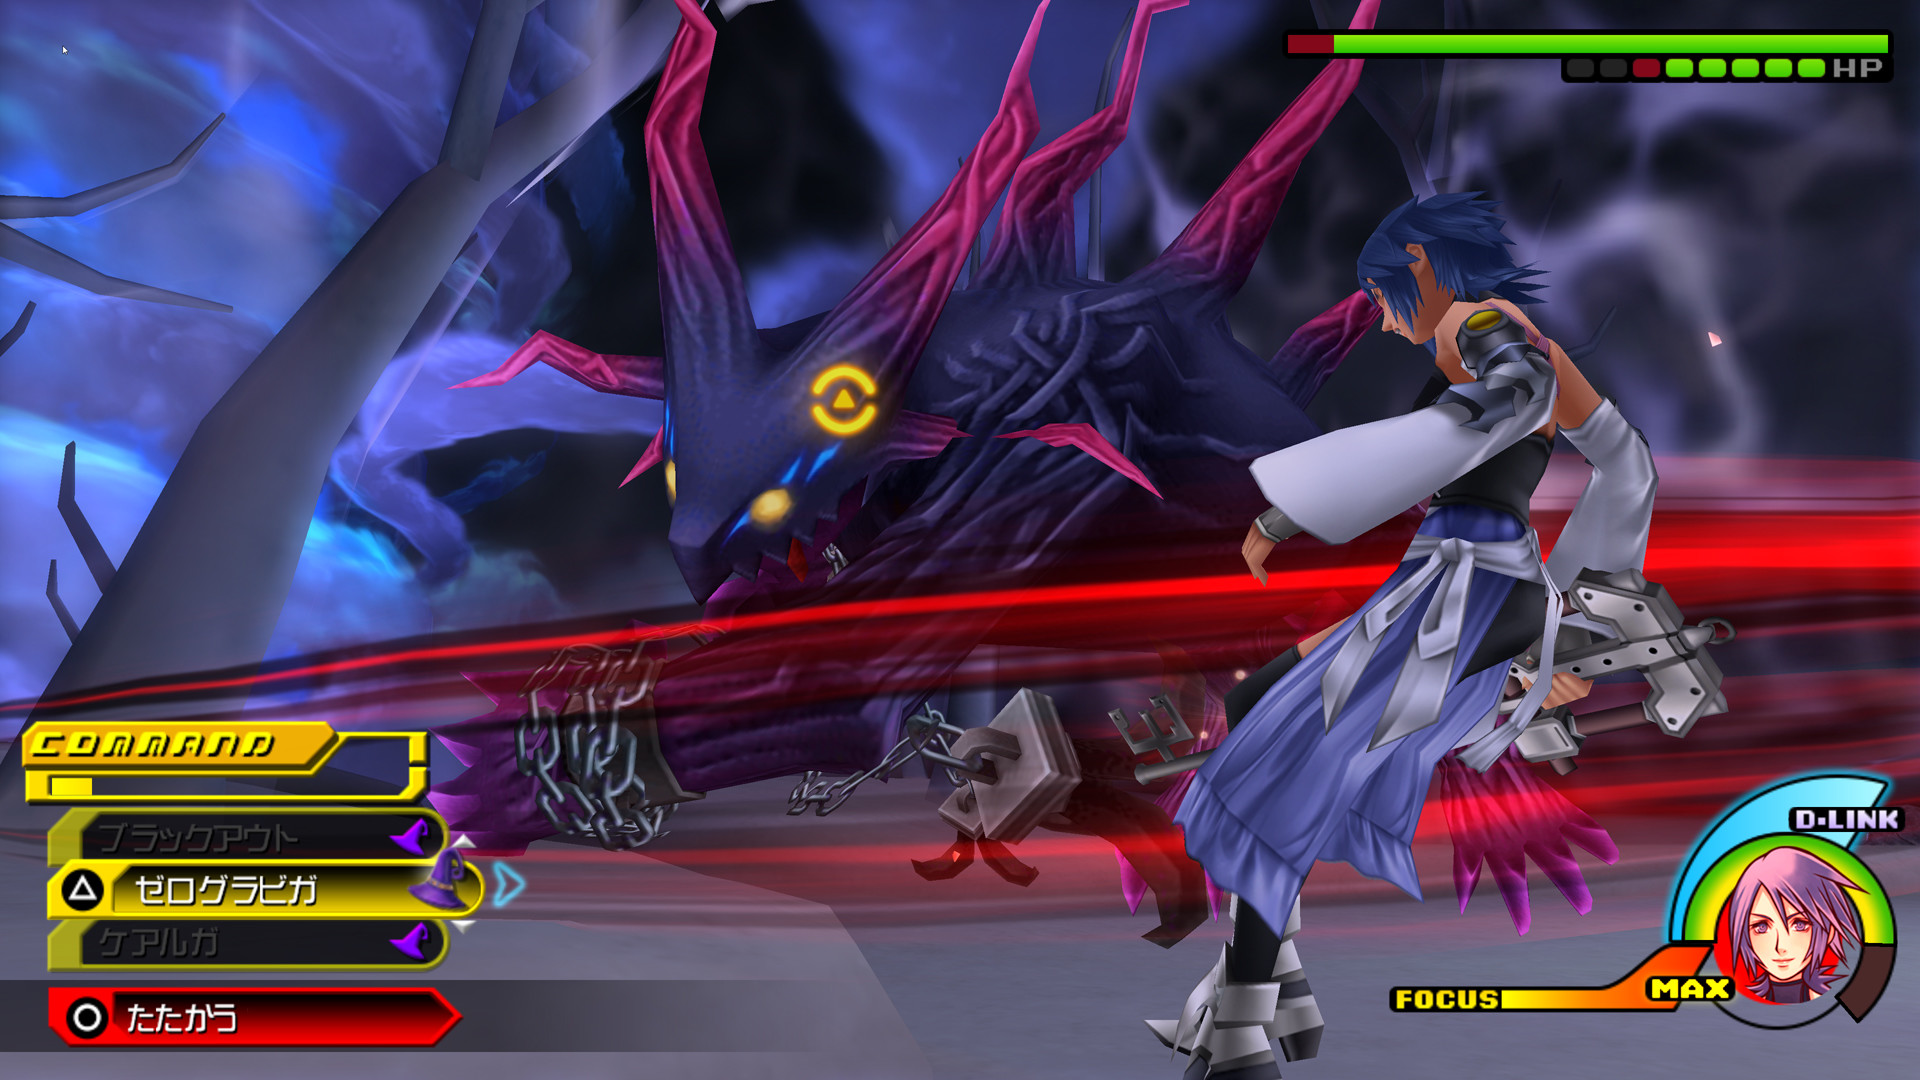 1920x1080 Kingdom Hearts -HD 2.5 ReMIX- will arrive at North American on December 2nd  2014, Europe on December 4th 2014, and the PAL region on December 5th 2014!